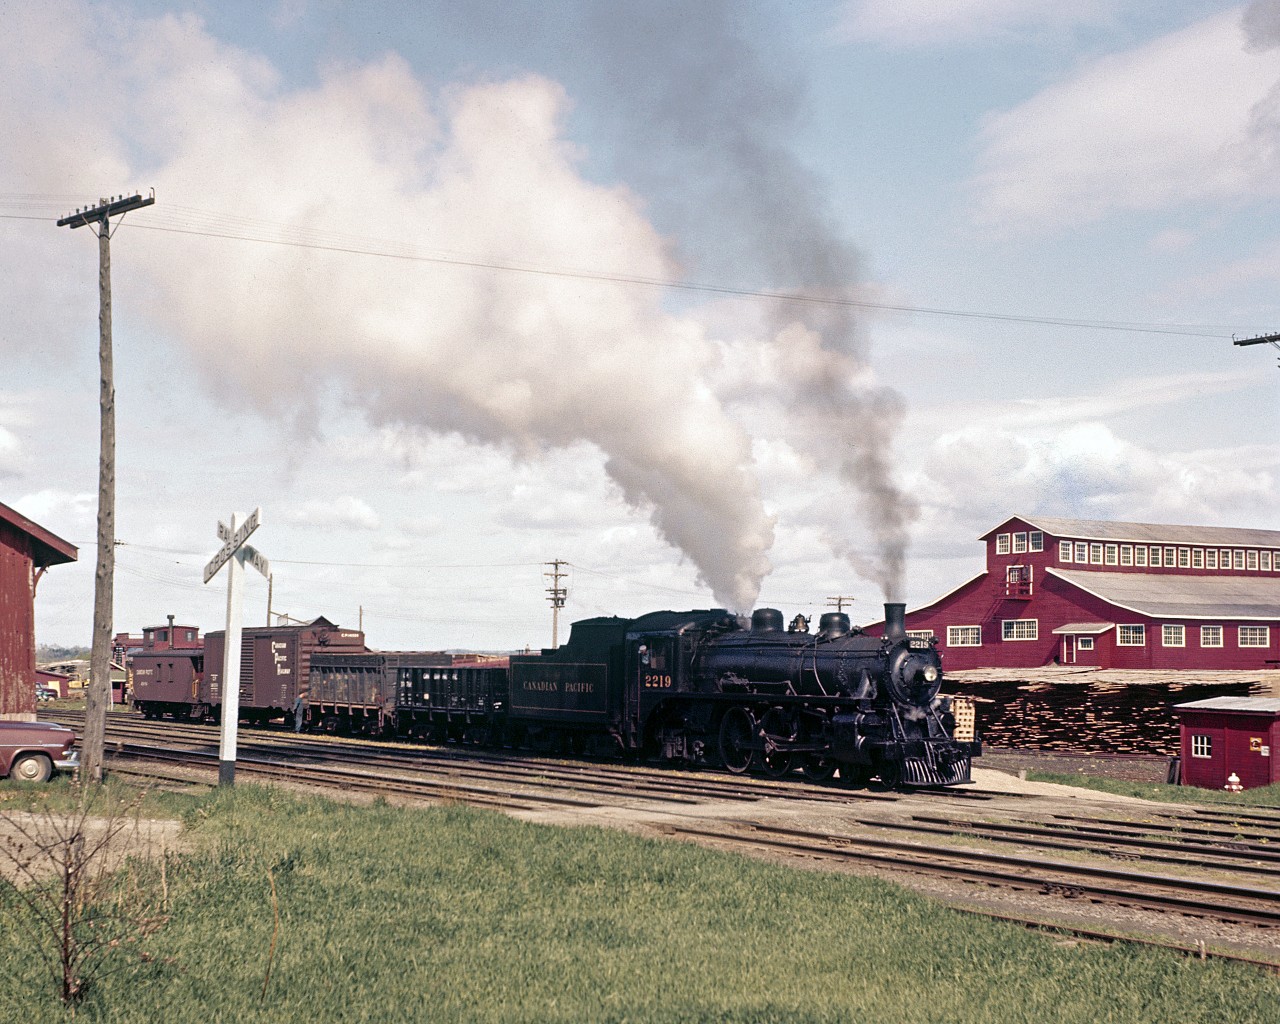 In the latter part of the 1950s, in the Upper Ottawa Valley community of Pembroke, Ontario, Stephan Delmonte (Del) Rosamond made a point of being trackside to photograph steam locomotive operations on Canadian Pacific Railway at a time when the Company was transitioning away from venerable steam power to modern diesel-electric locomotion.  The accompanying two photographs were archived during this time period.




On what appears to be a pleasant spring day, circa 1956-57, Del is on location near the downtown CPR station, as the Chalk River to Smiths Falls wayfreight makes a switch move in front of the Consolidated Paper and Lumber Company mill located on the south shore of the nearby Ottawa River.  Today's motive power is G1s class 4-6-2 Light Pacific No. 2219.  The engine, one of 39 coal fired G1's operated by the CPR, was out-shopped in February 1910 by Canadian Pacific's Angus Shops in Montreal, and has been modernized over the years.  According to the late Duncan H. du Fresne - who fired this class of locomotive - the engine received a new boiler and cylinders during a 1924 rebuild, and has been fitted-out with a modern cross compound air compressor.  In 1950 it became one of three G1 class 2200s to receive a Standard HT-1 Stoker, with the other 36 remaining hand-fired coal burners.  At the time of the stoker installation the engine was paired with a 14 ton/8000 Imperial gallon capacity tender.  Duncan would later write in his book titled 'When Steam and Steel get in your Blood' that “the upgrade made them into super G1's... much like the modern G5's".




Engine No. 2219 saw service in Eastern Ontario well into 1960, and was disposed of by Canadian Pacific in July 1961.  The locomotive was likely scrapped shortly thereafter.


Original digital scanning provided by DigMyPics in Arizona.


Additional Photoshop restoration by Raymond Farand.


Research and narrative courtesy of Raymond Farand.